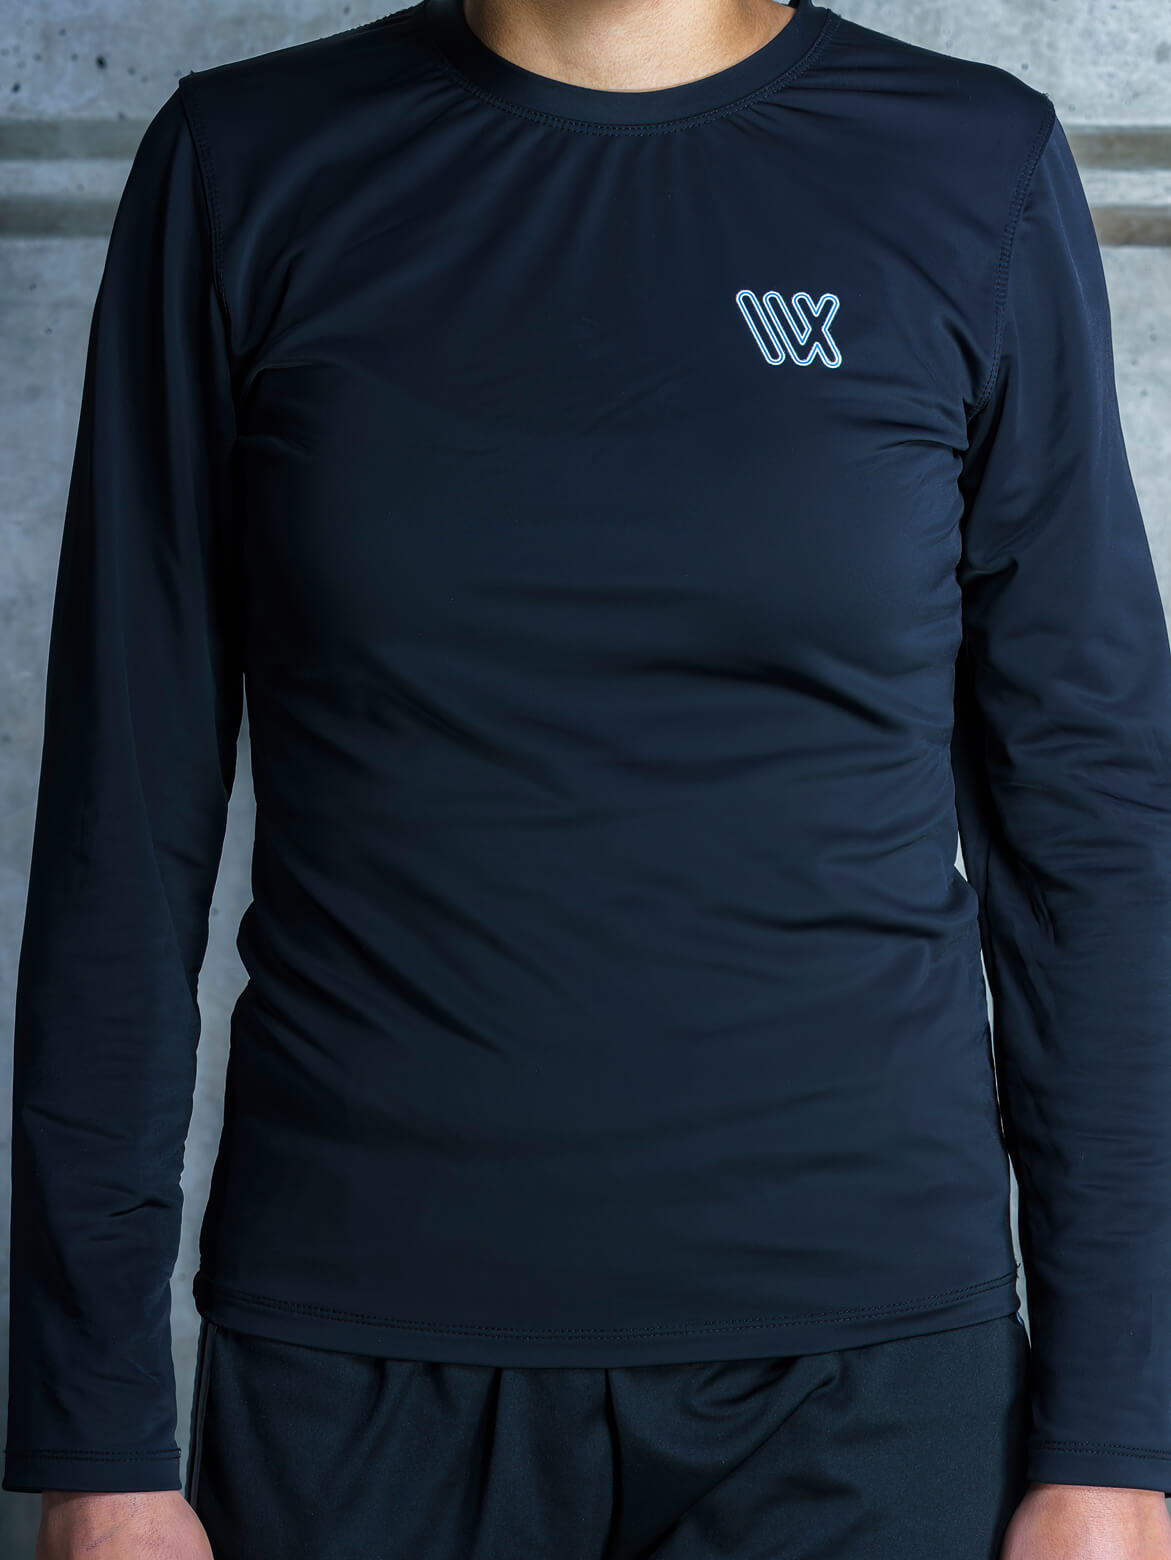 Warrior Hill's youth long sleeve shirt in black